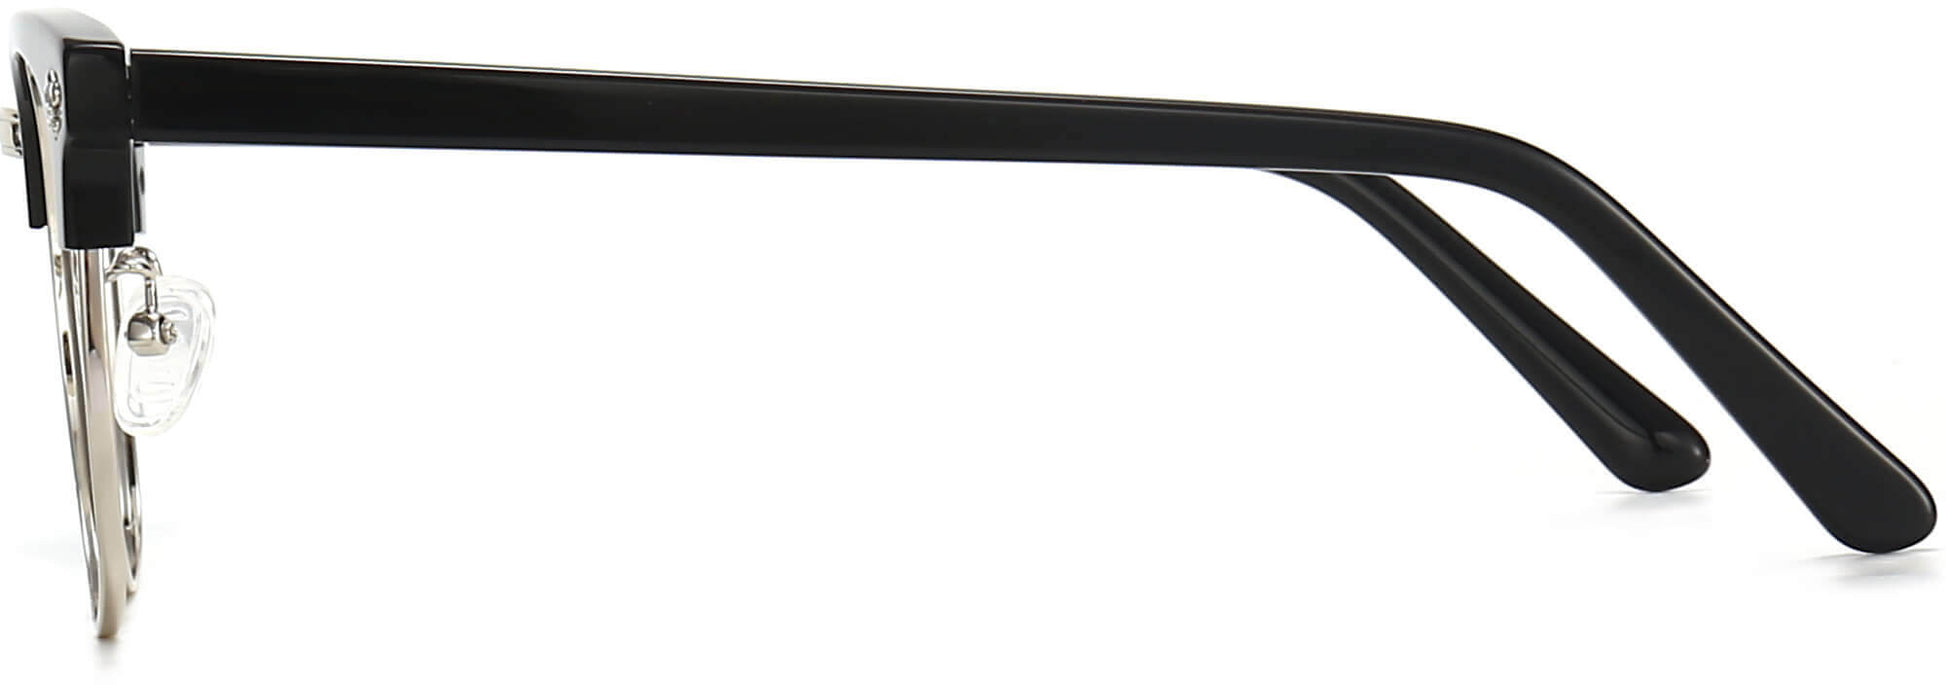 Colin Browline Black Eyeglasses from ANRRI, side view